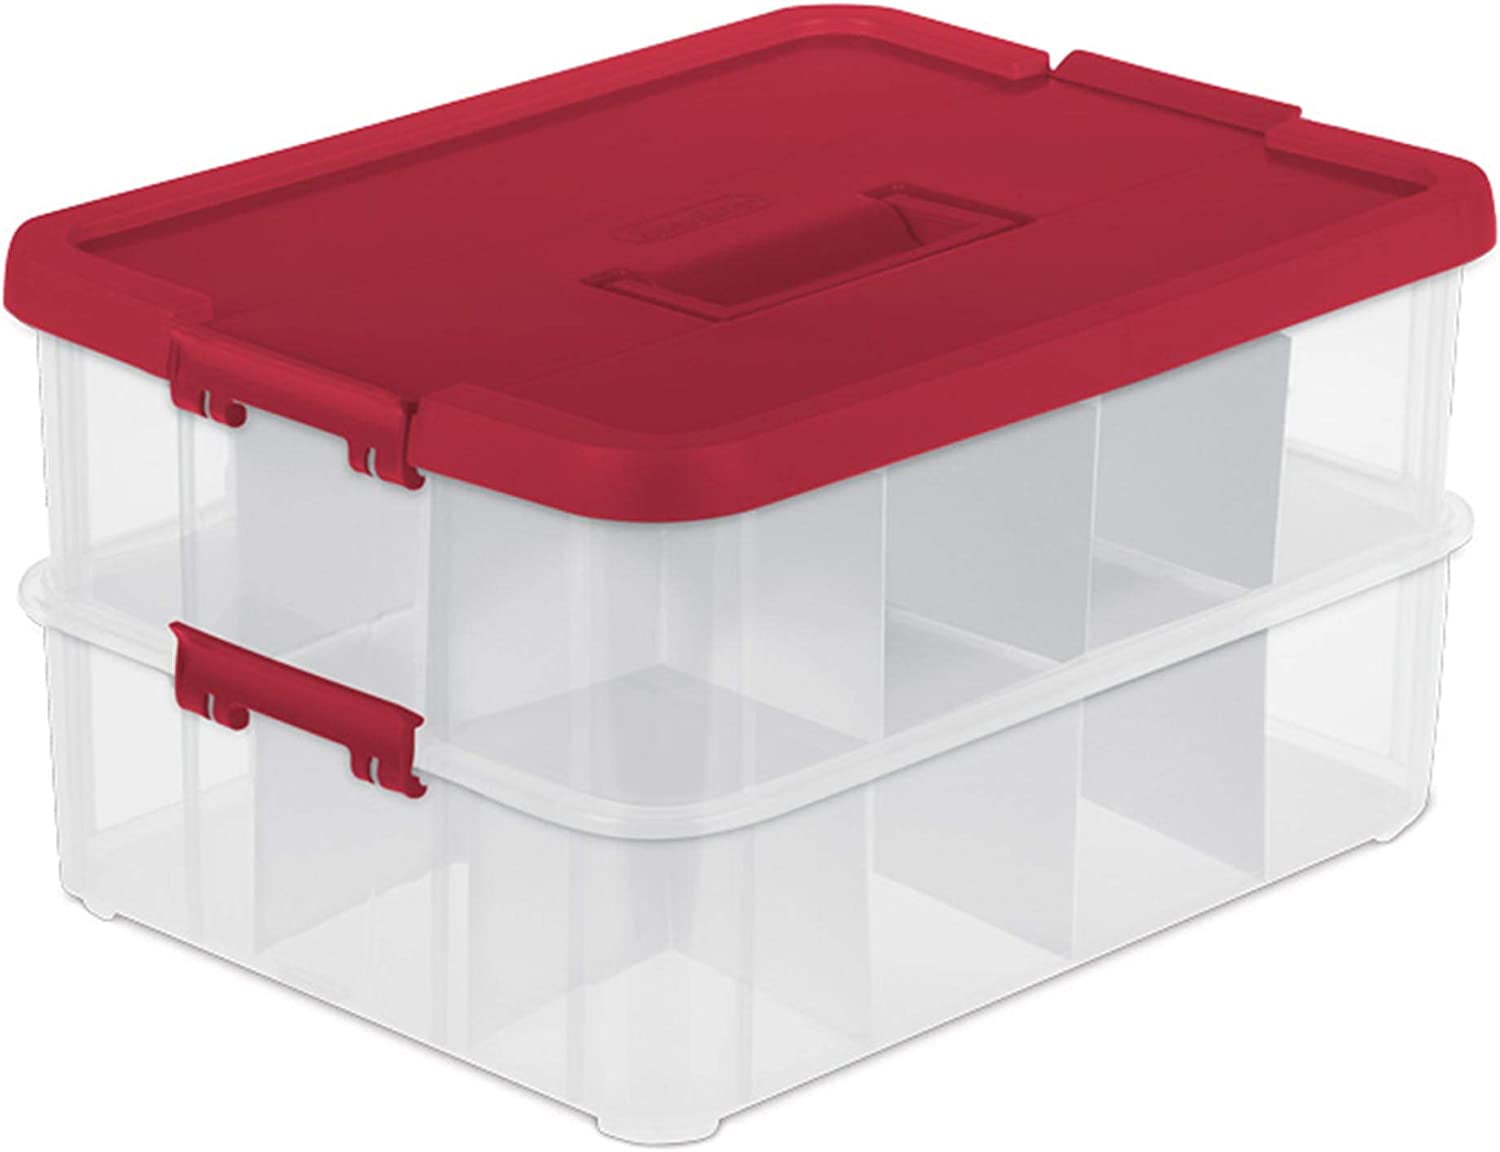 Sterilite 14028606 Divided Storage Case for Crafting and Hardware - 6 Pack